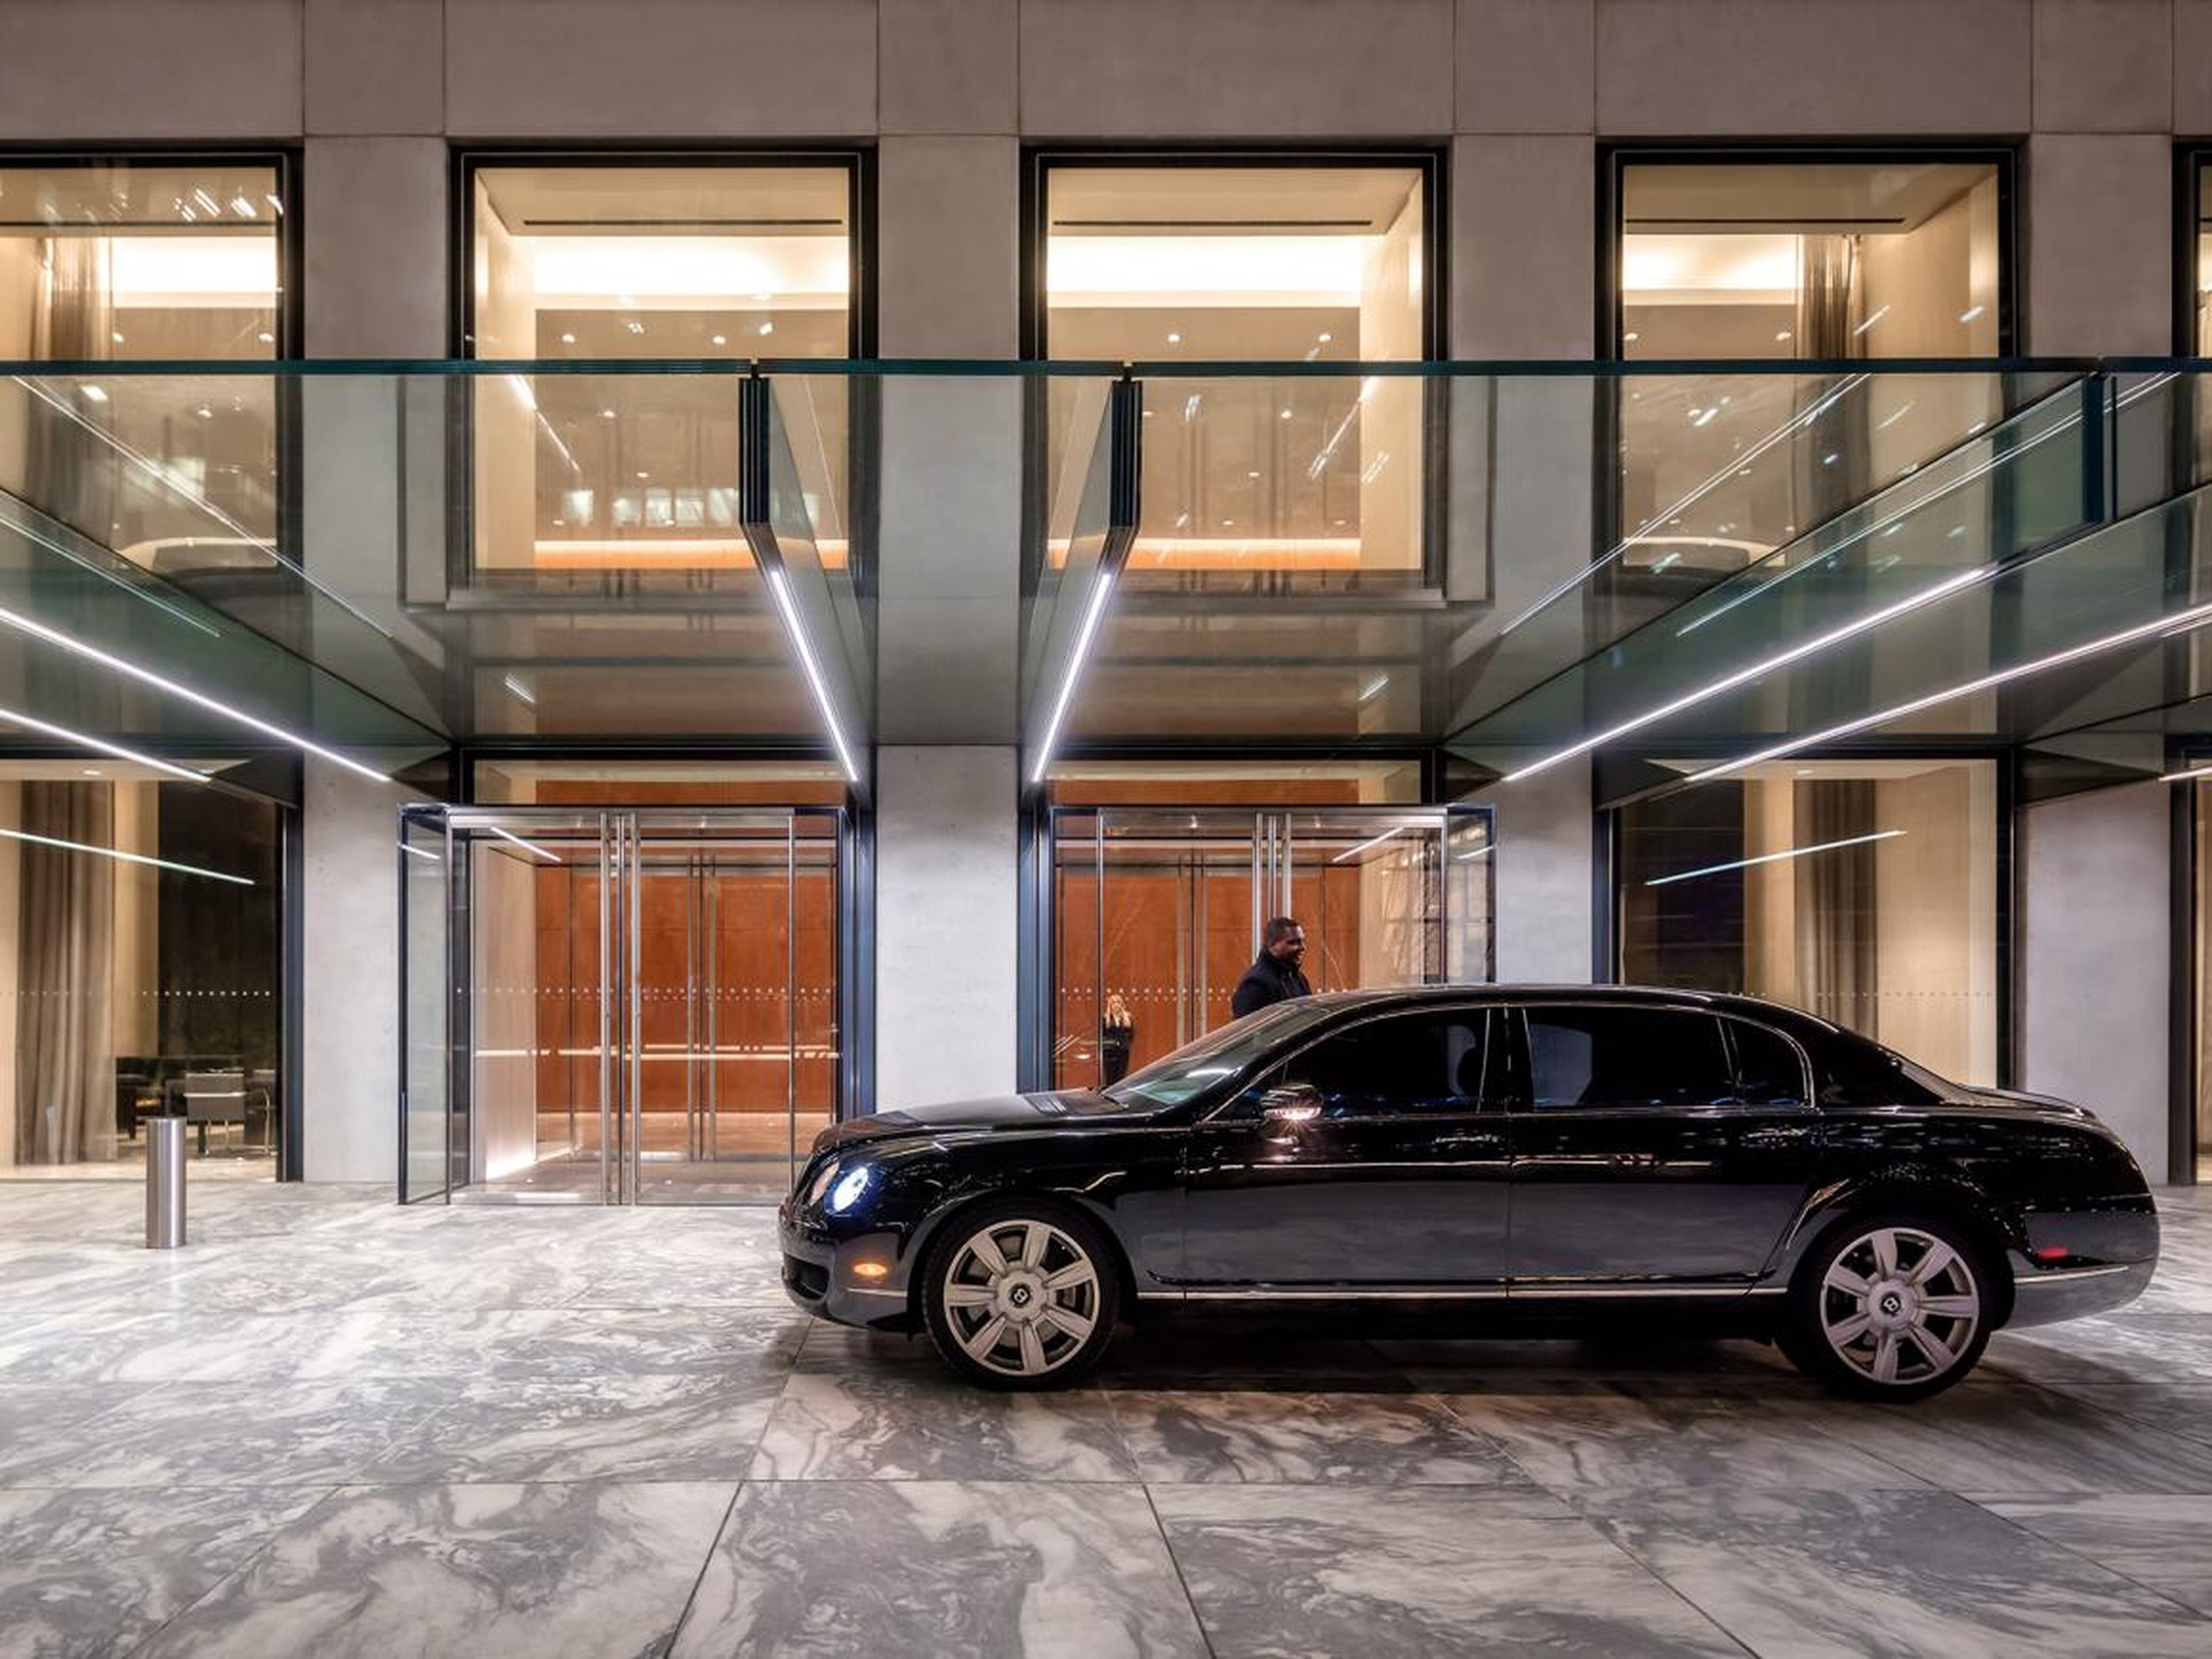 432 Park features a full-time concierge, a 24-hour door attendant, valet parking, and a private covered entryway where vehicles can discreetly drop off residents and guests.